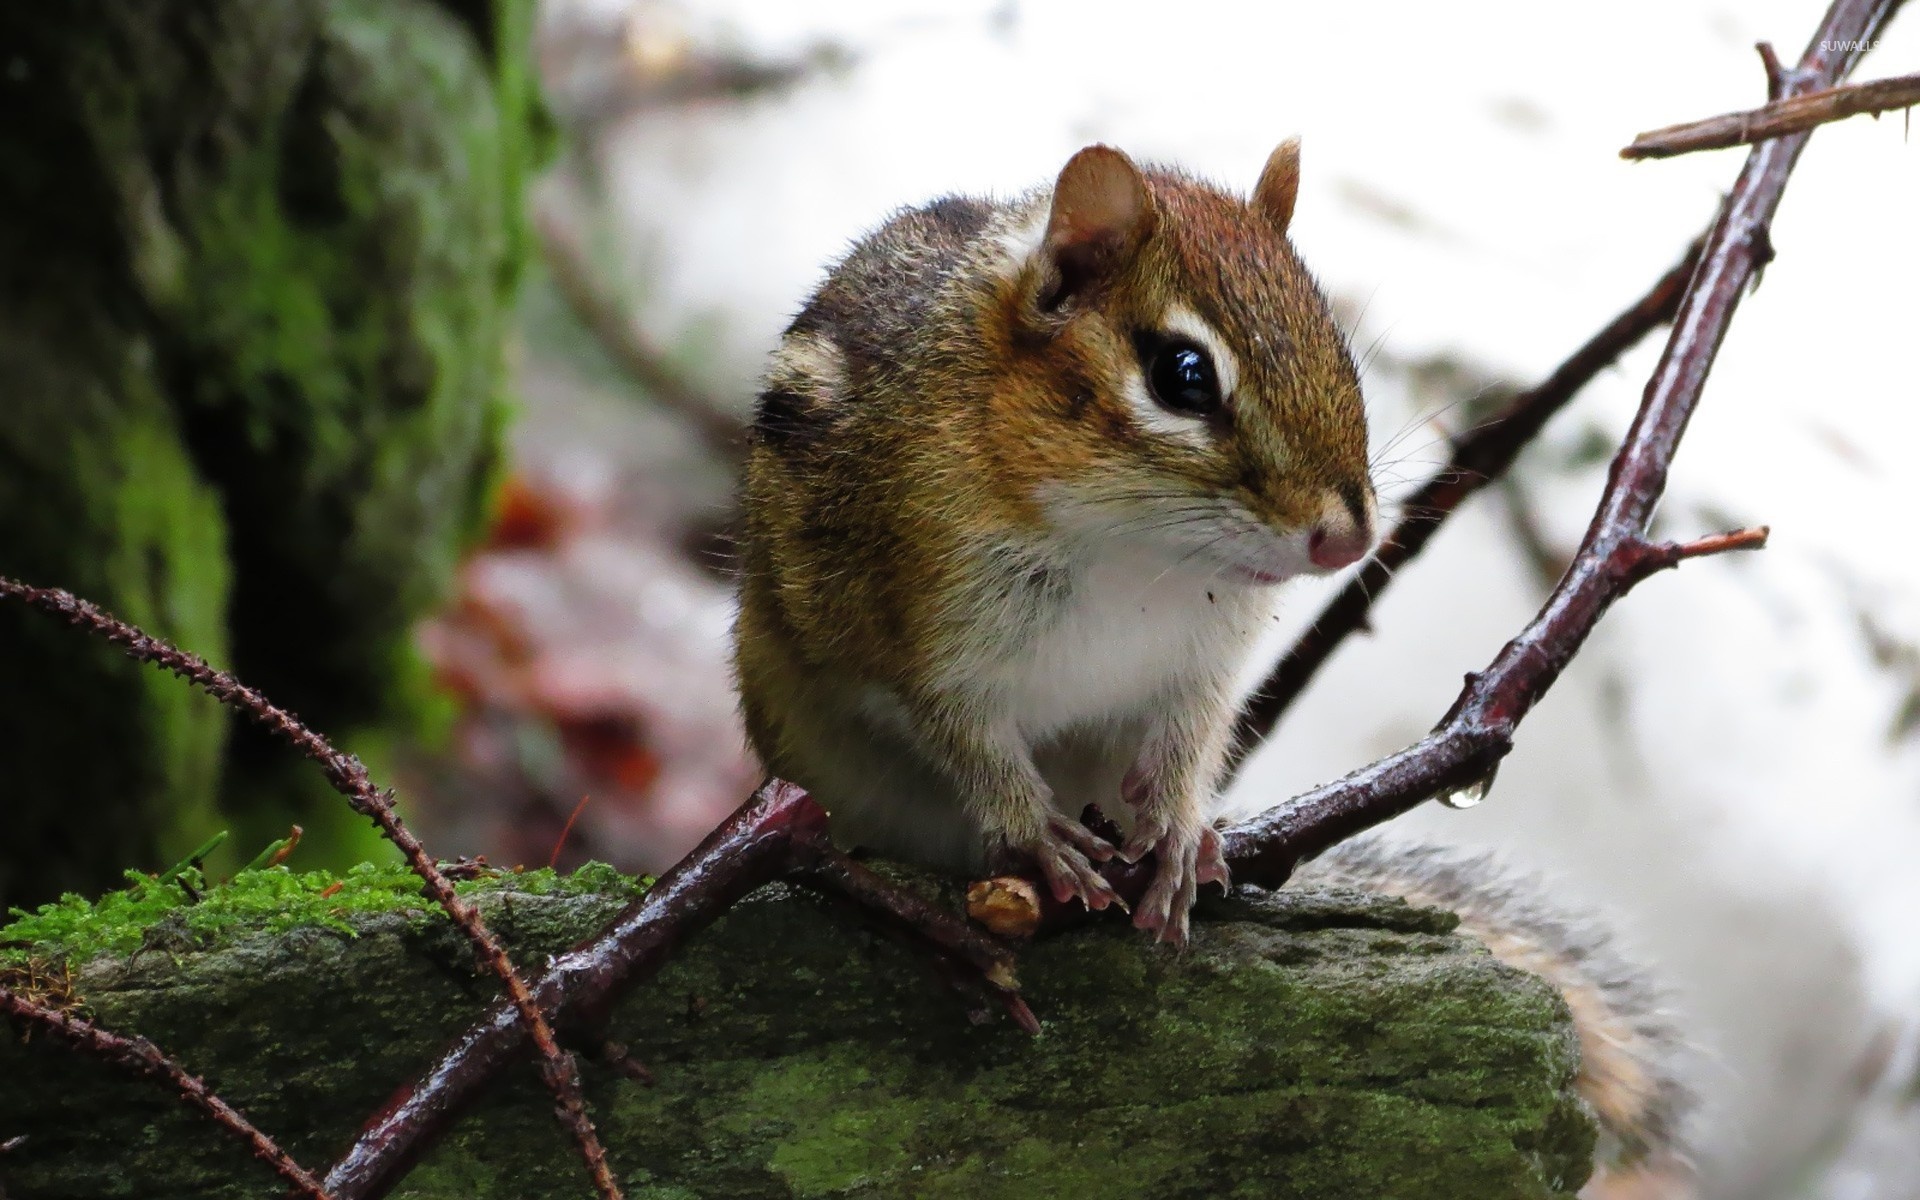 Chipmunk: Have cheek pouches, large, glossy eyes, stripes, and bushy tails. 1920x1200 HD Wallpaper.